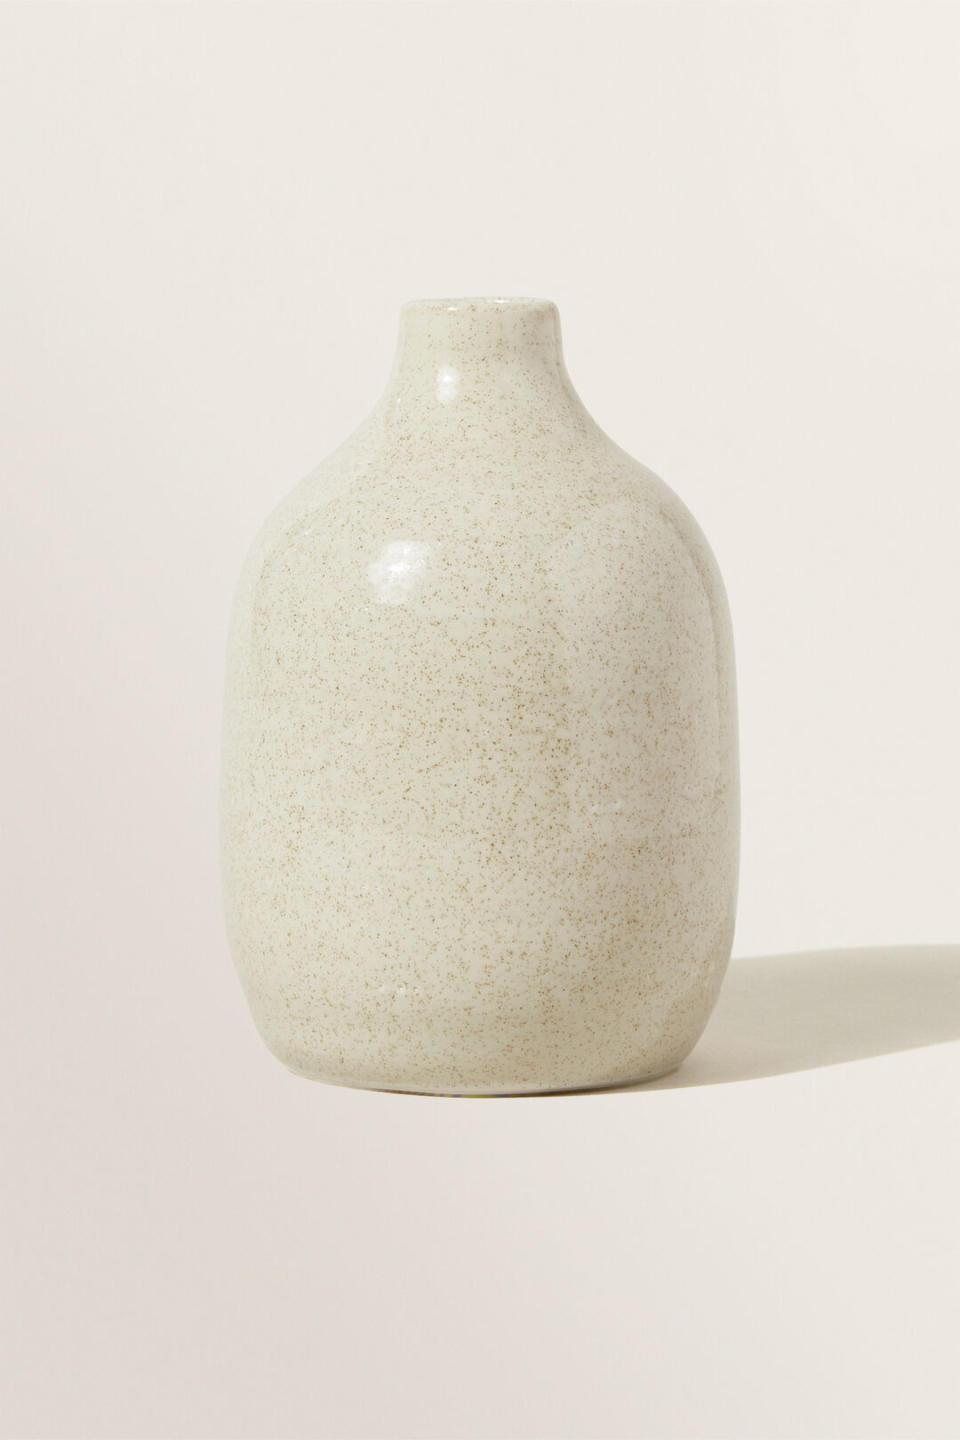 Tate Bud Vase in Oat Speckle, $99.95